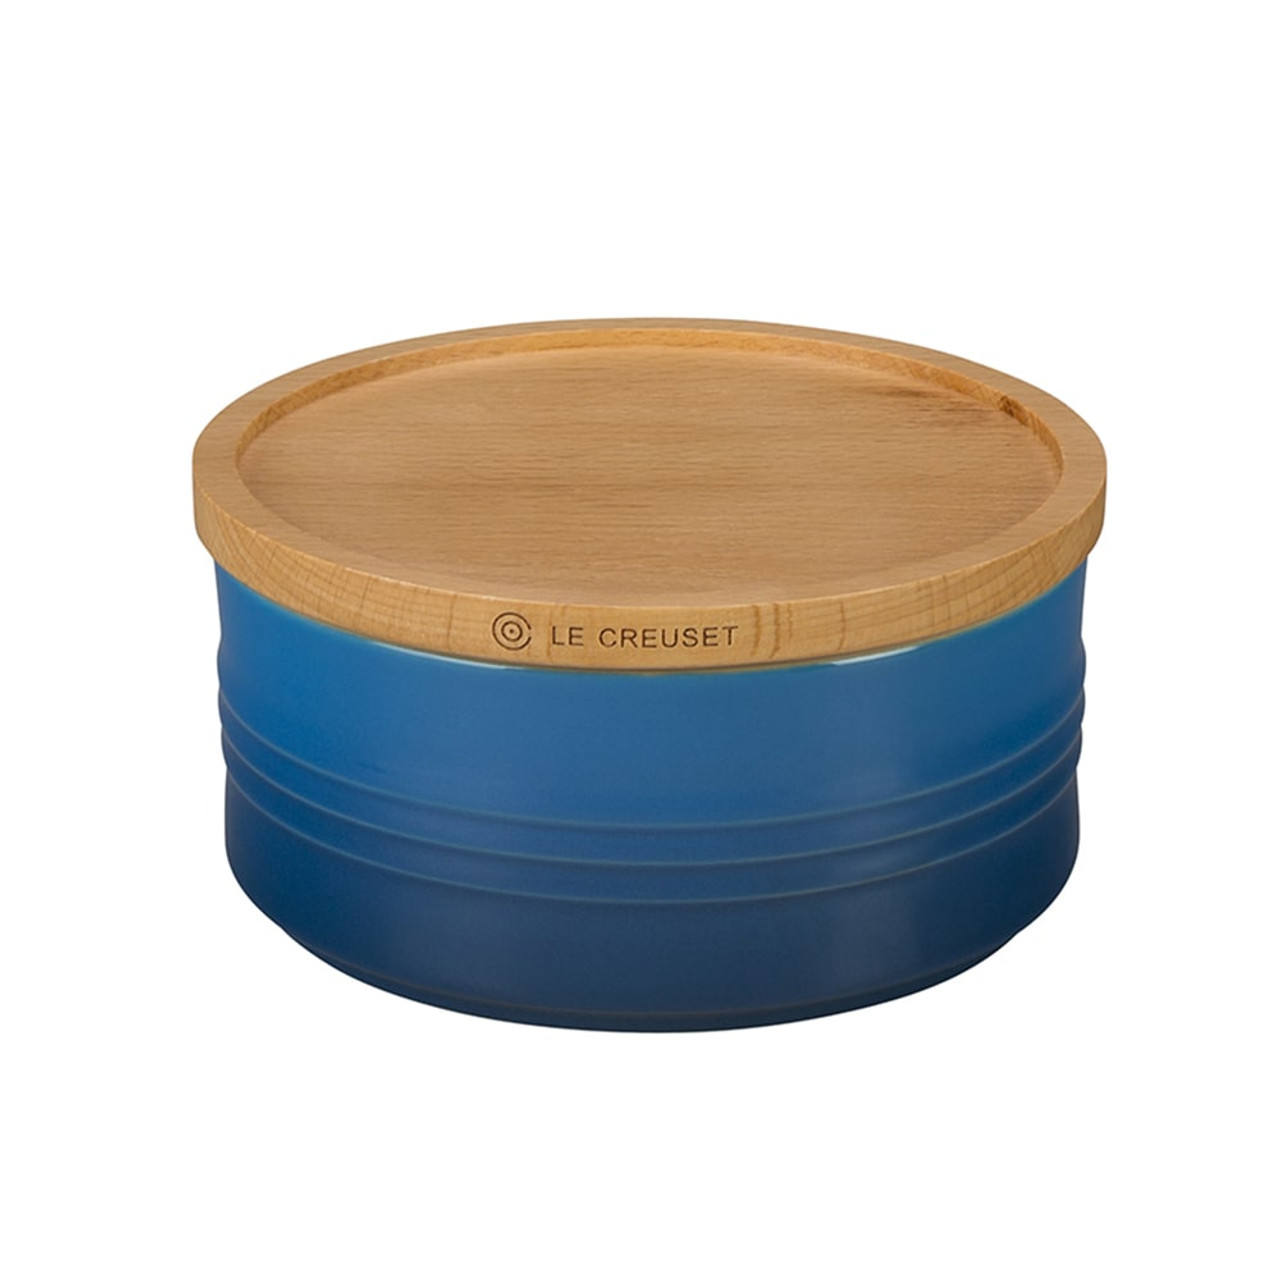 Le Creuset 1.5-Quart Stoneware Canister with Wood Lid - Marseille